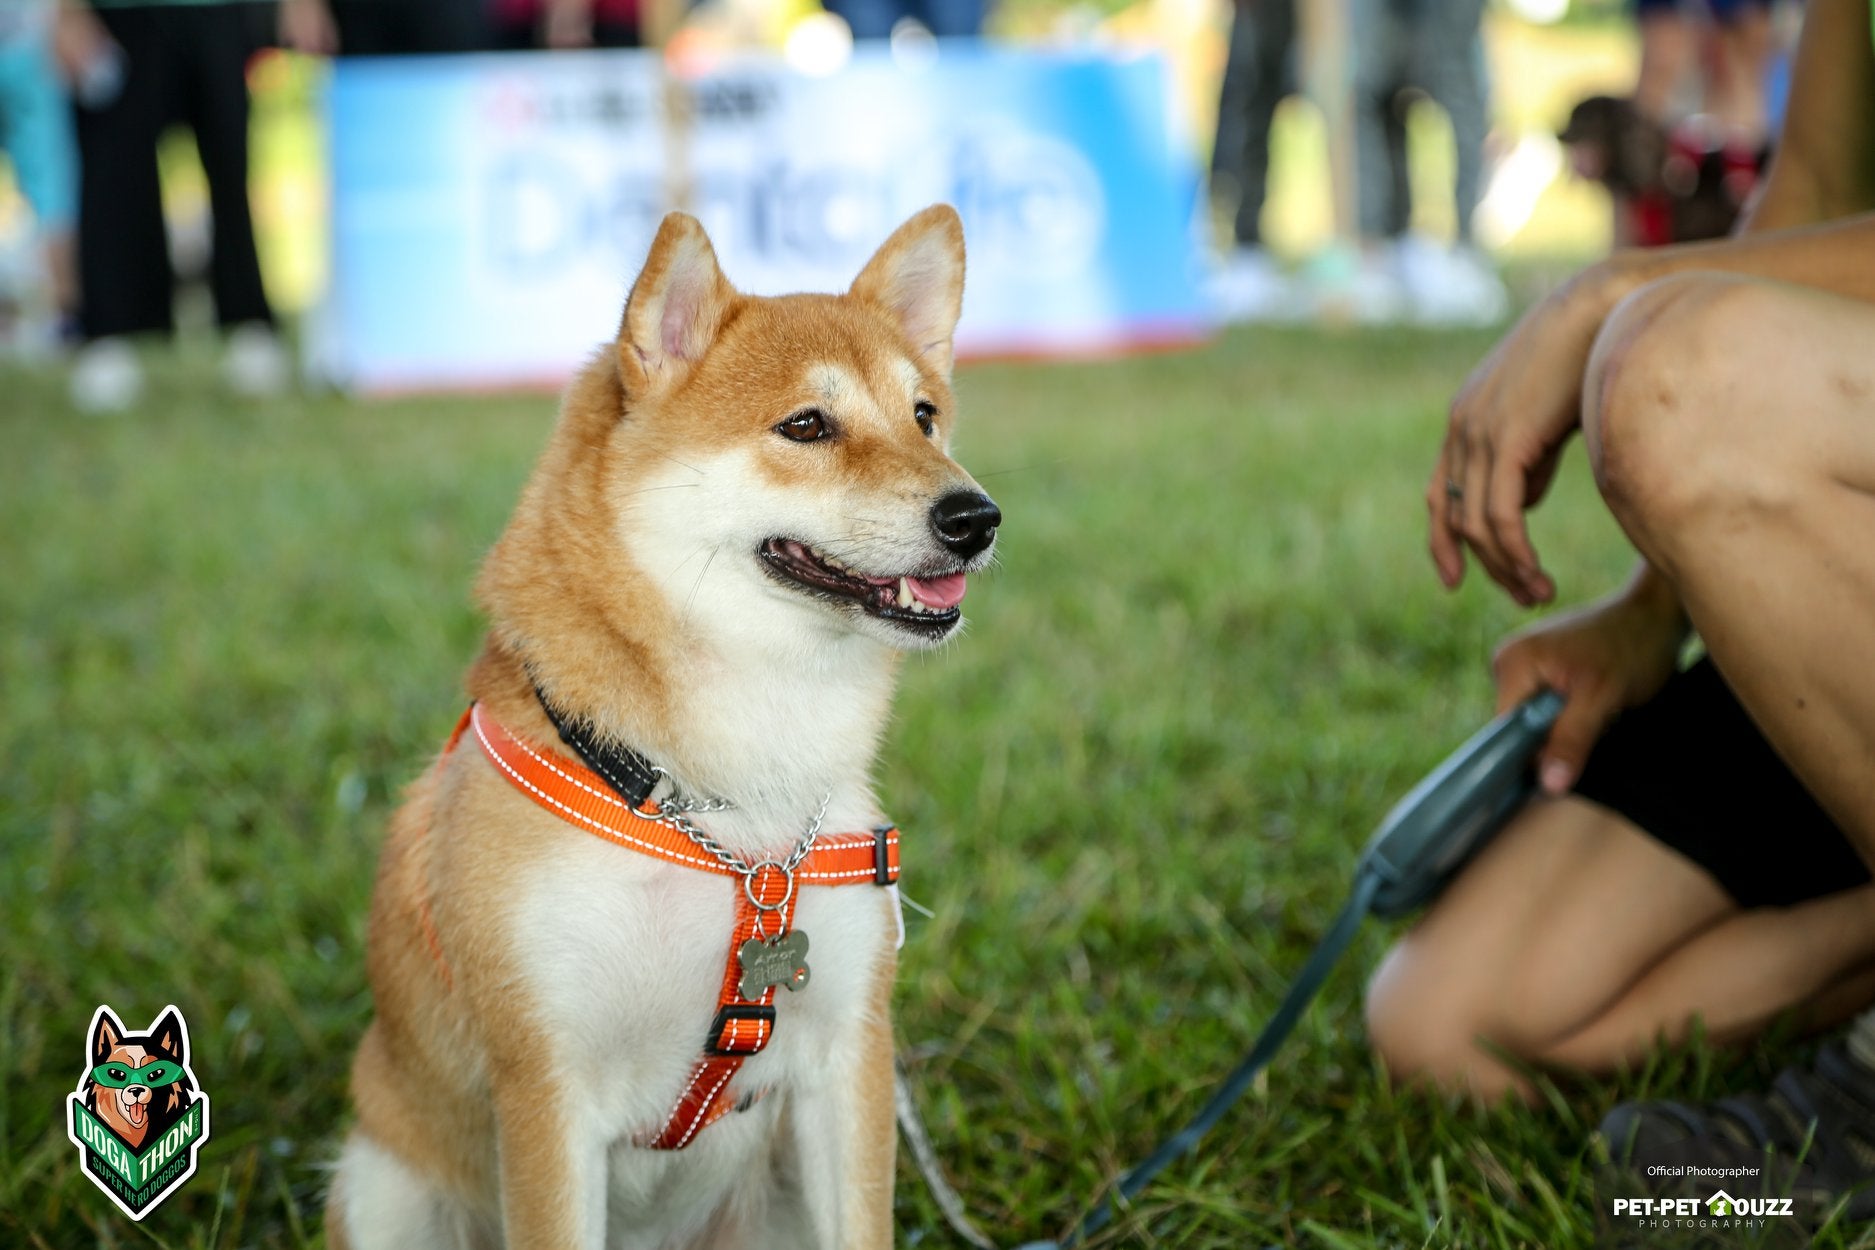 [TEST] This Event in M'sia Has Over 700 Cute Doggos & Is Held In Conjunction with An Amazing Cause! - WORLD OF BUZZ 2